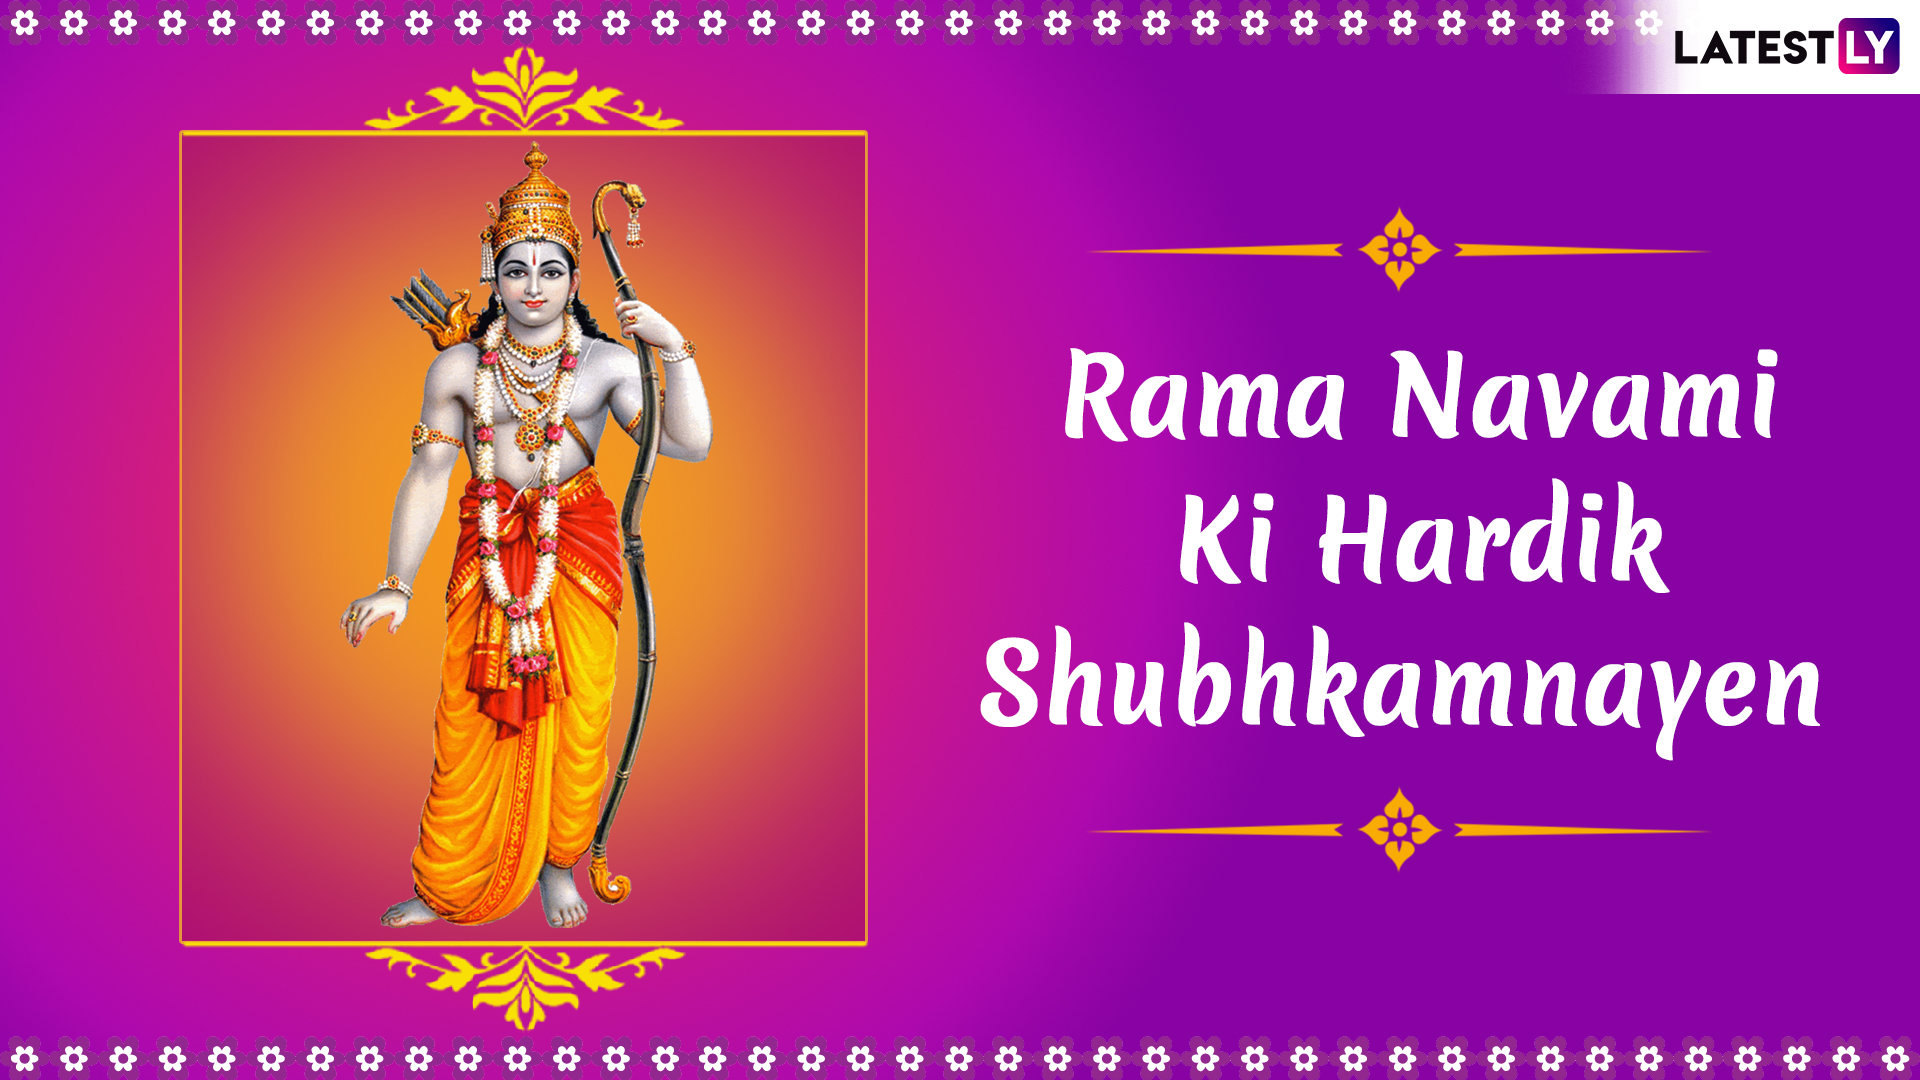 Rama Navami Images & Shree Ram HD Wallpapers for Free Download Online: Wish  Happy Ram Navami 2019 With GIF Greetings & WhatsApp Sticker Messages | 🙏🏻  LatestLY